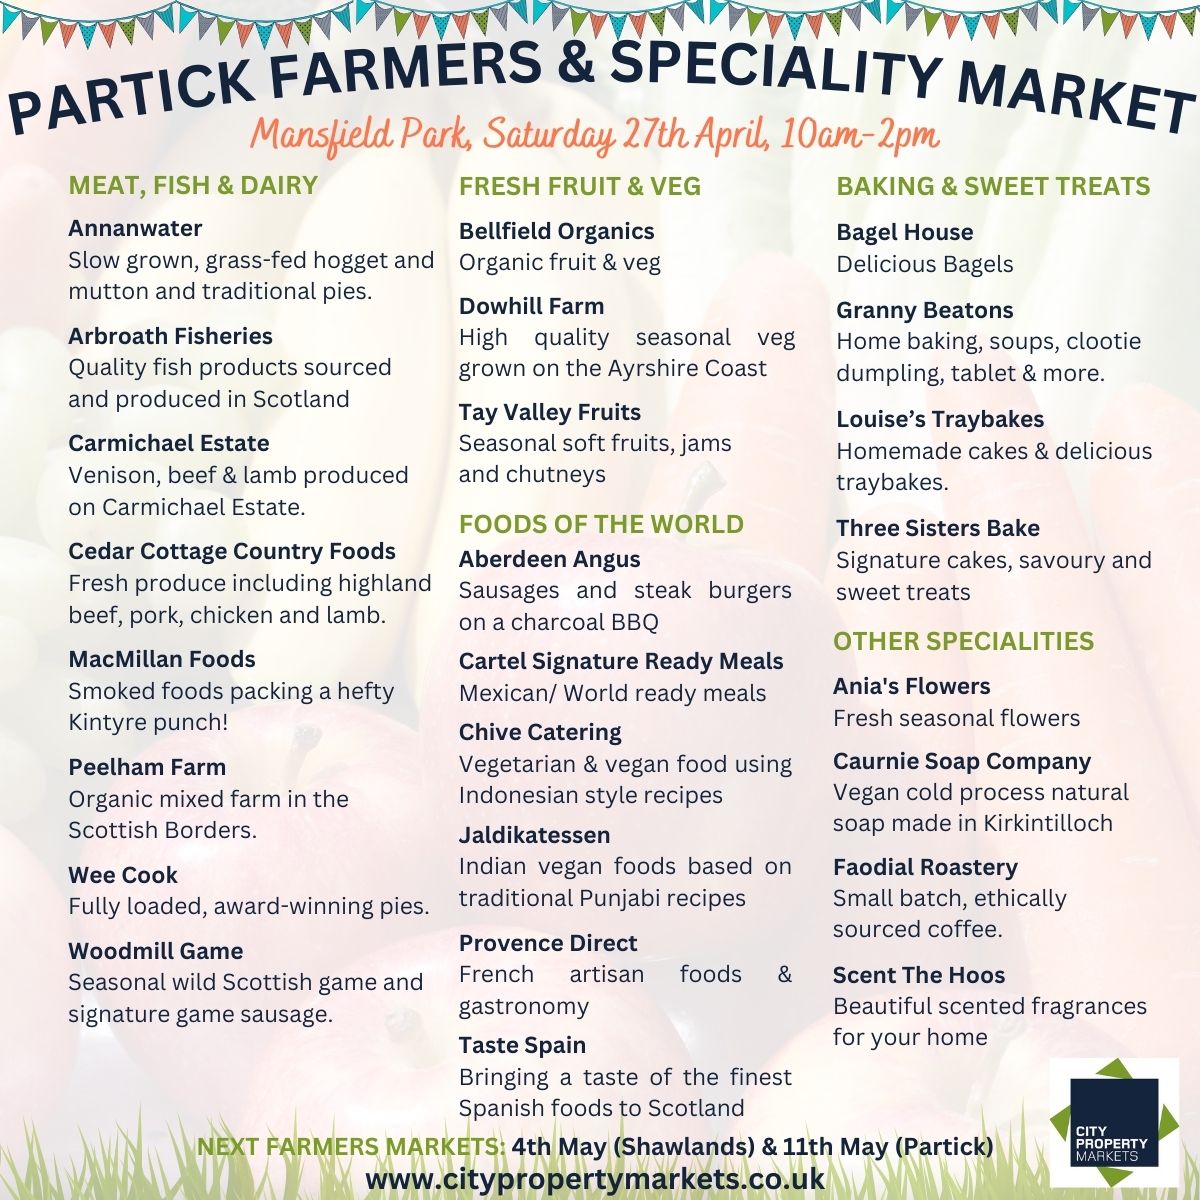 We're back in Partick tomorrow - find your favourite traders at Mansfield Park from 10am-2pm!

citypropertymarkets.co.uk/markets/farmer… 

#CityPropertyMarkets #GlasgowMarkets #Glasgow #FarmersMarkets #GlasgowFarmersMarkets #GlasgowWestEnd #Partick #ShopLocal #WhatsOnGlasgow